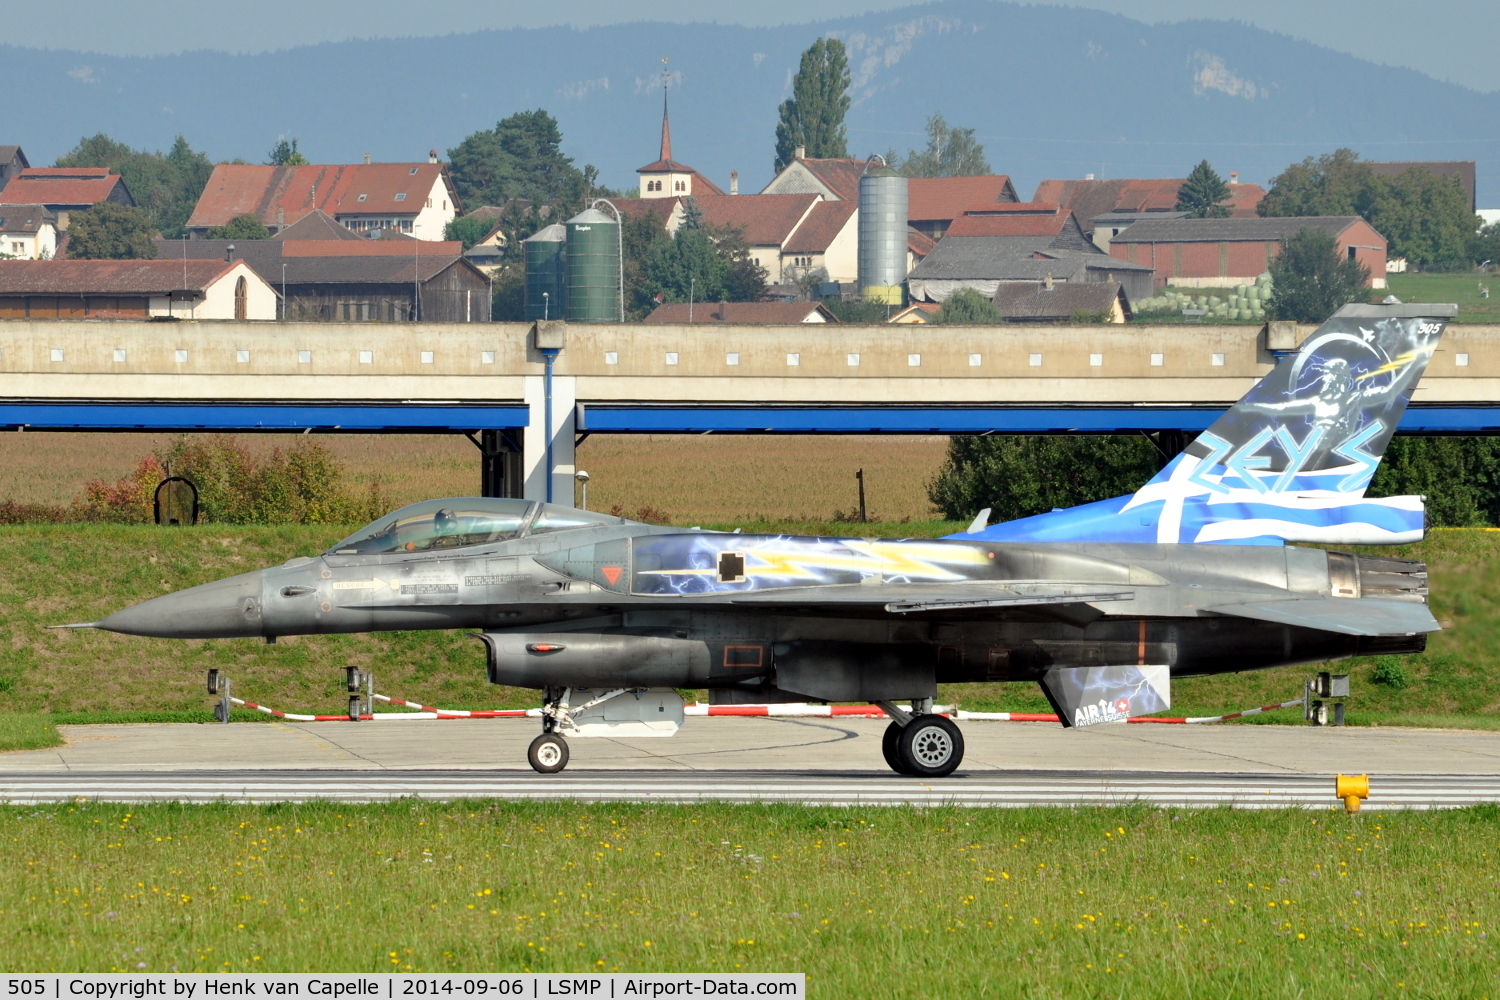 505, General Dynamics F-16C Fighting Falcon C/N XK-6, F-16C-52 with conformal fuel tanks of the Air Force of Greece on the runway of Payerne Air Base, Switzerland, for a display (AIR14). Note that ZEUS is painted on its tail.